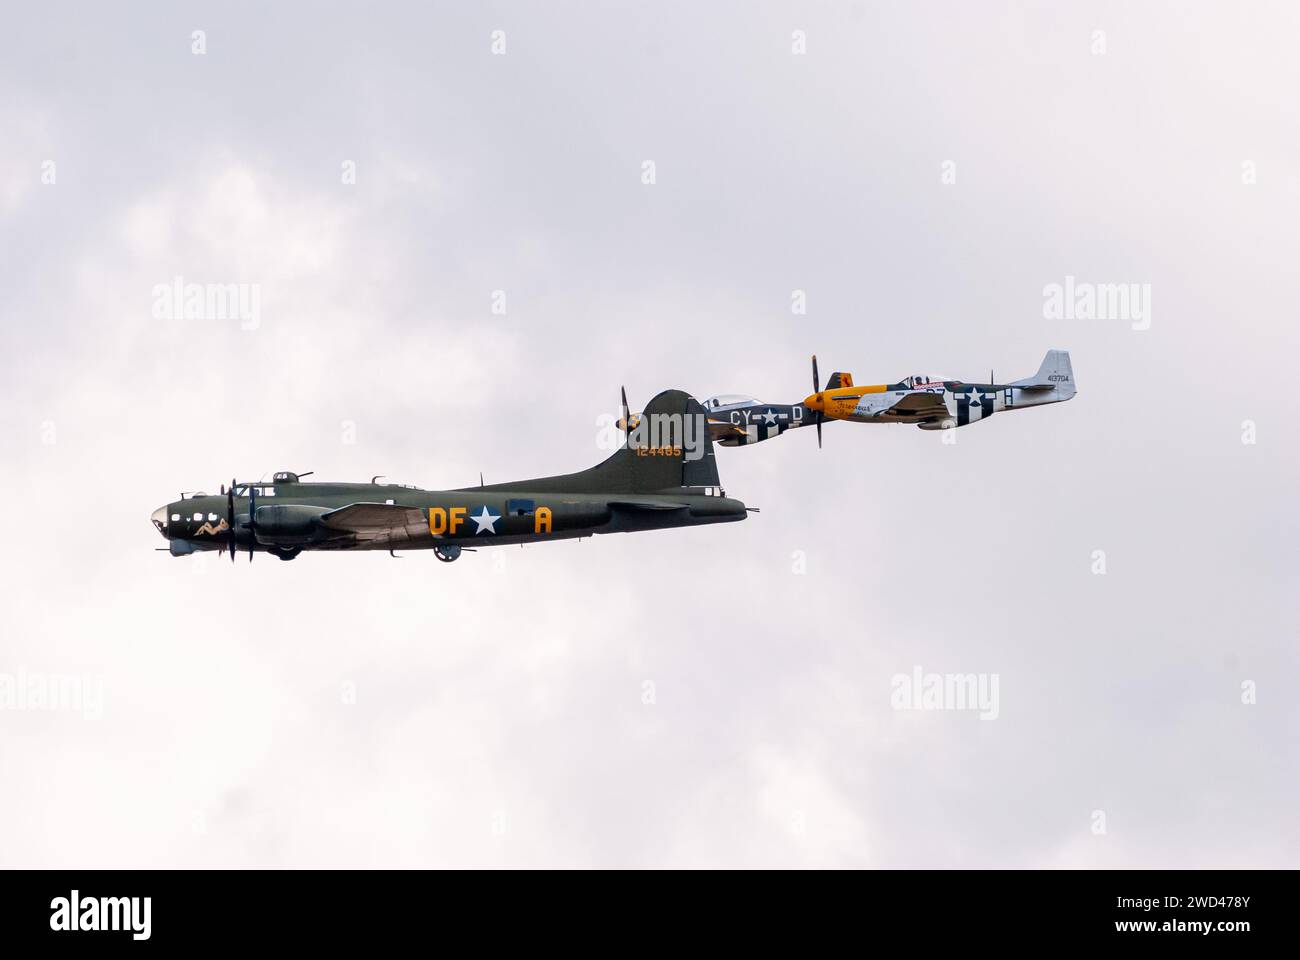 B-17G Flying Fortress with P51 Mustang fighter planes.  WW2 Bomber plane from United States airforce representing the famous 'Memphis Belle' 124485' Stock Photo